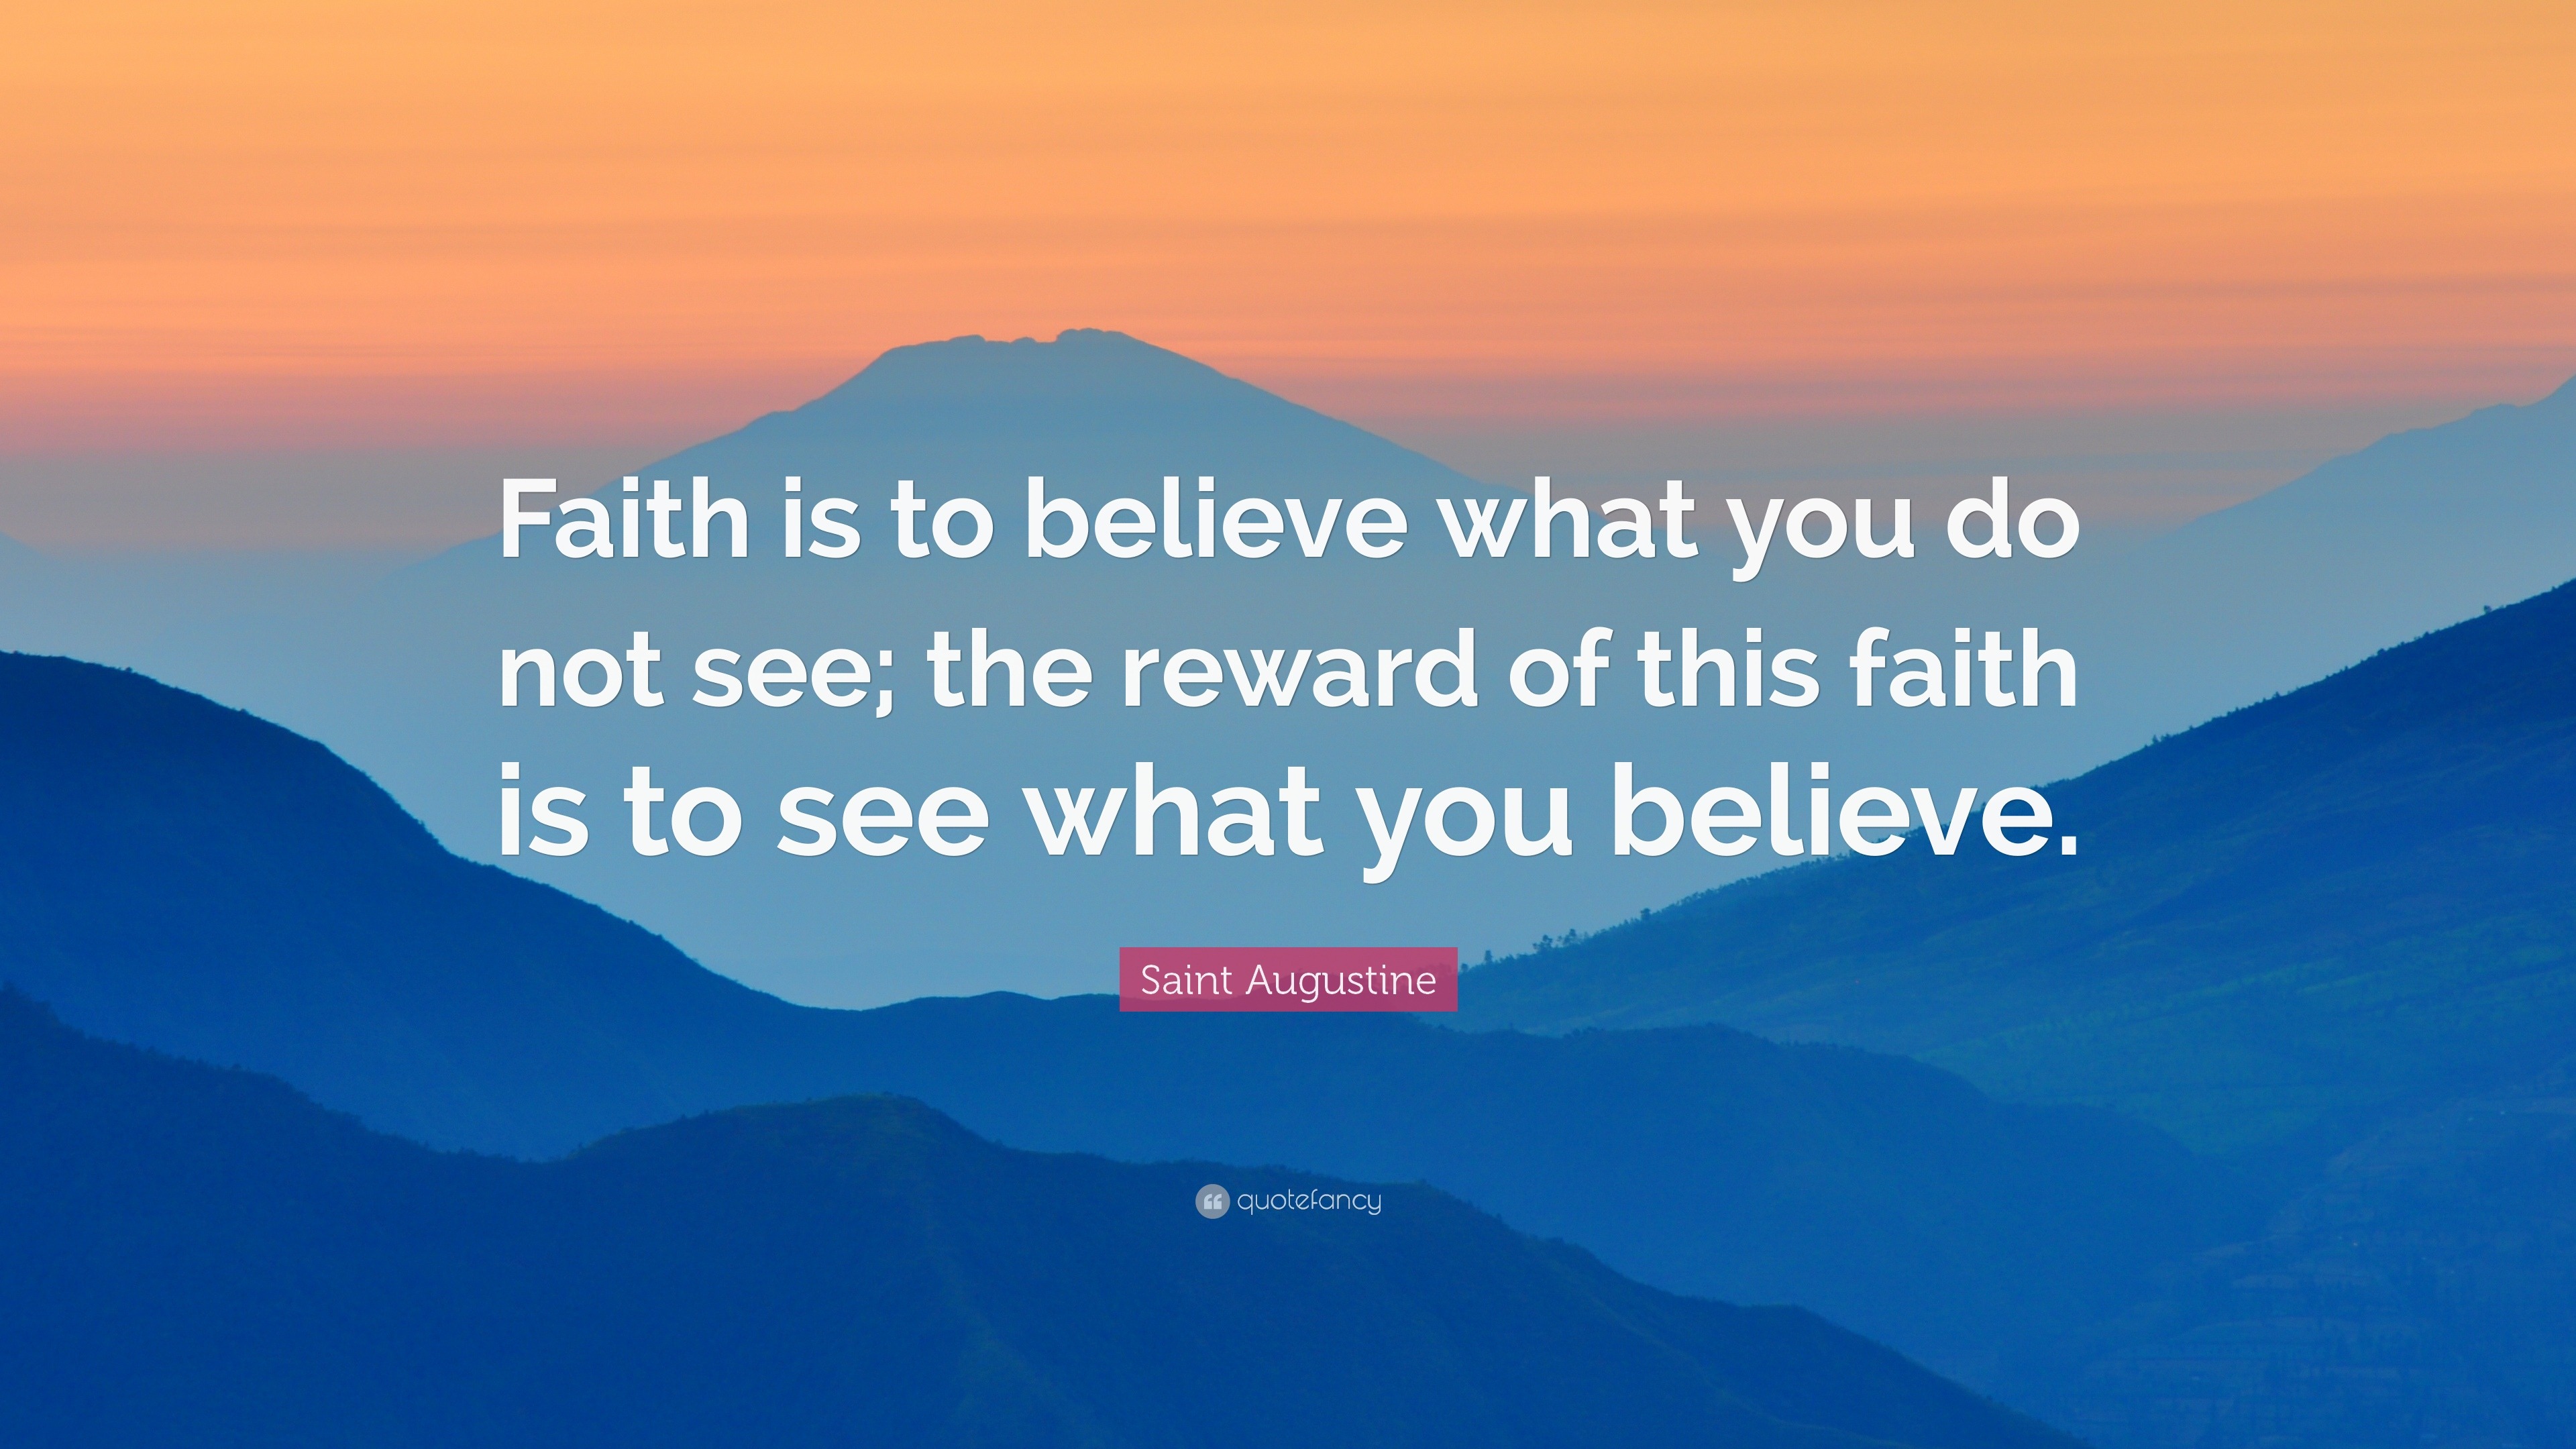 Saint Augustine Quote: “Faith is to believe what you do not see; the